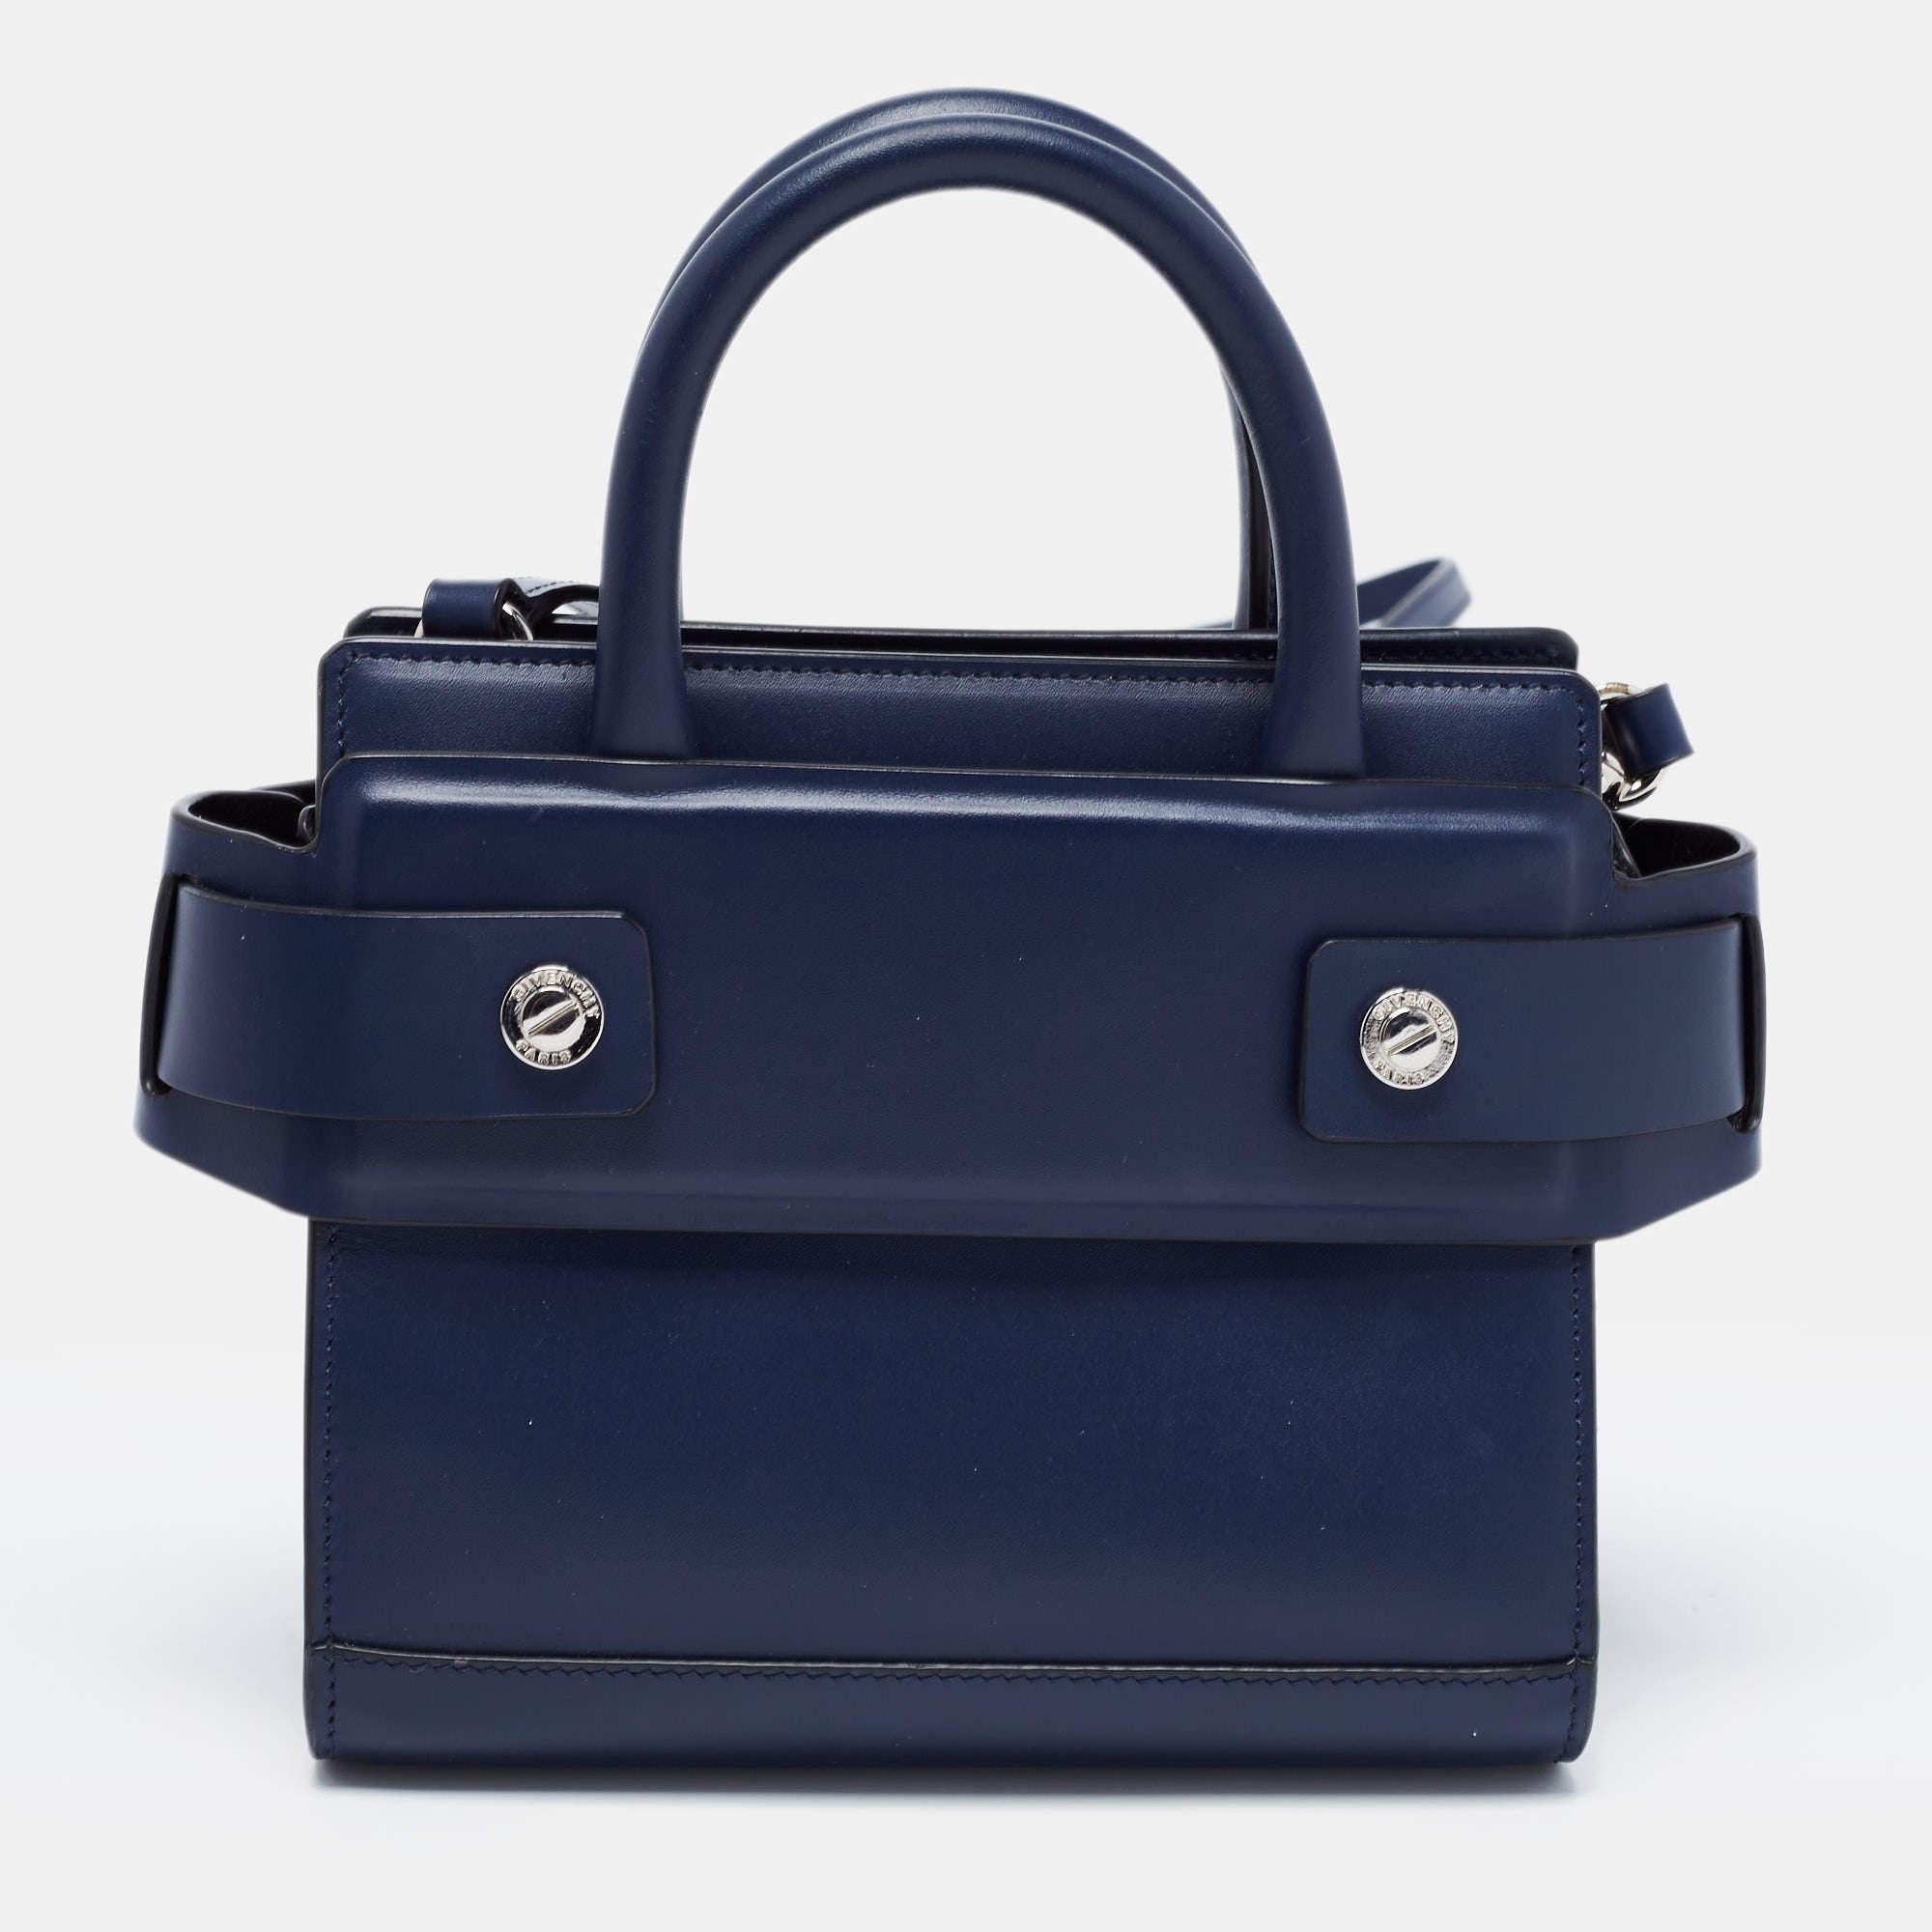 Givenchy is famed across the globe for its exquisite designs. From the brand's incredible accessory collection comes this Horizon bag. Crafted from leather in a navy blue shade, the bag is aided by top handles, a long strap, and the label's logo